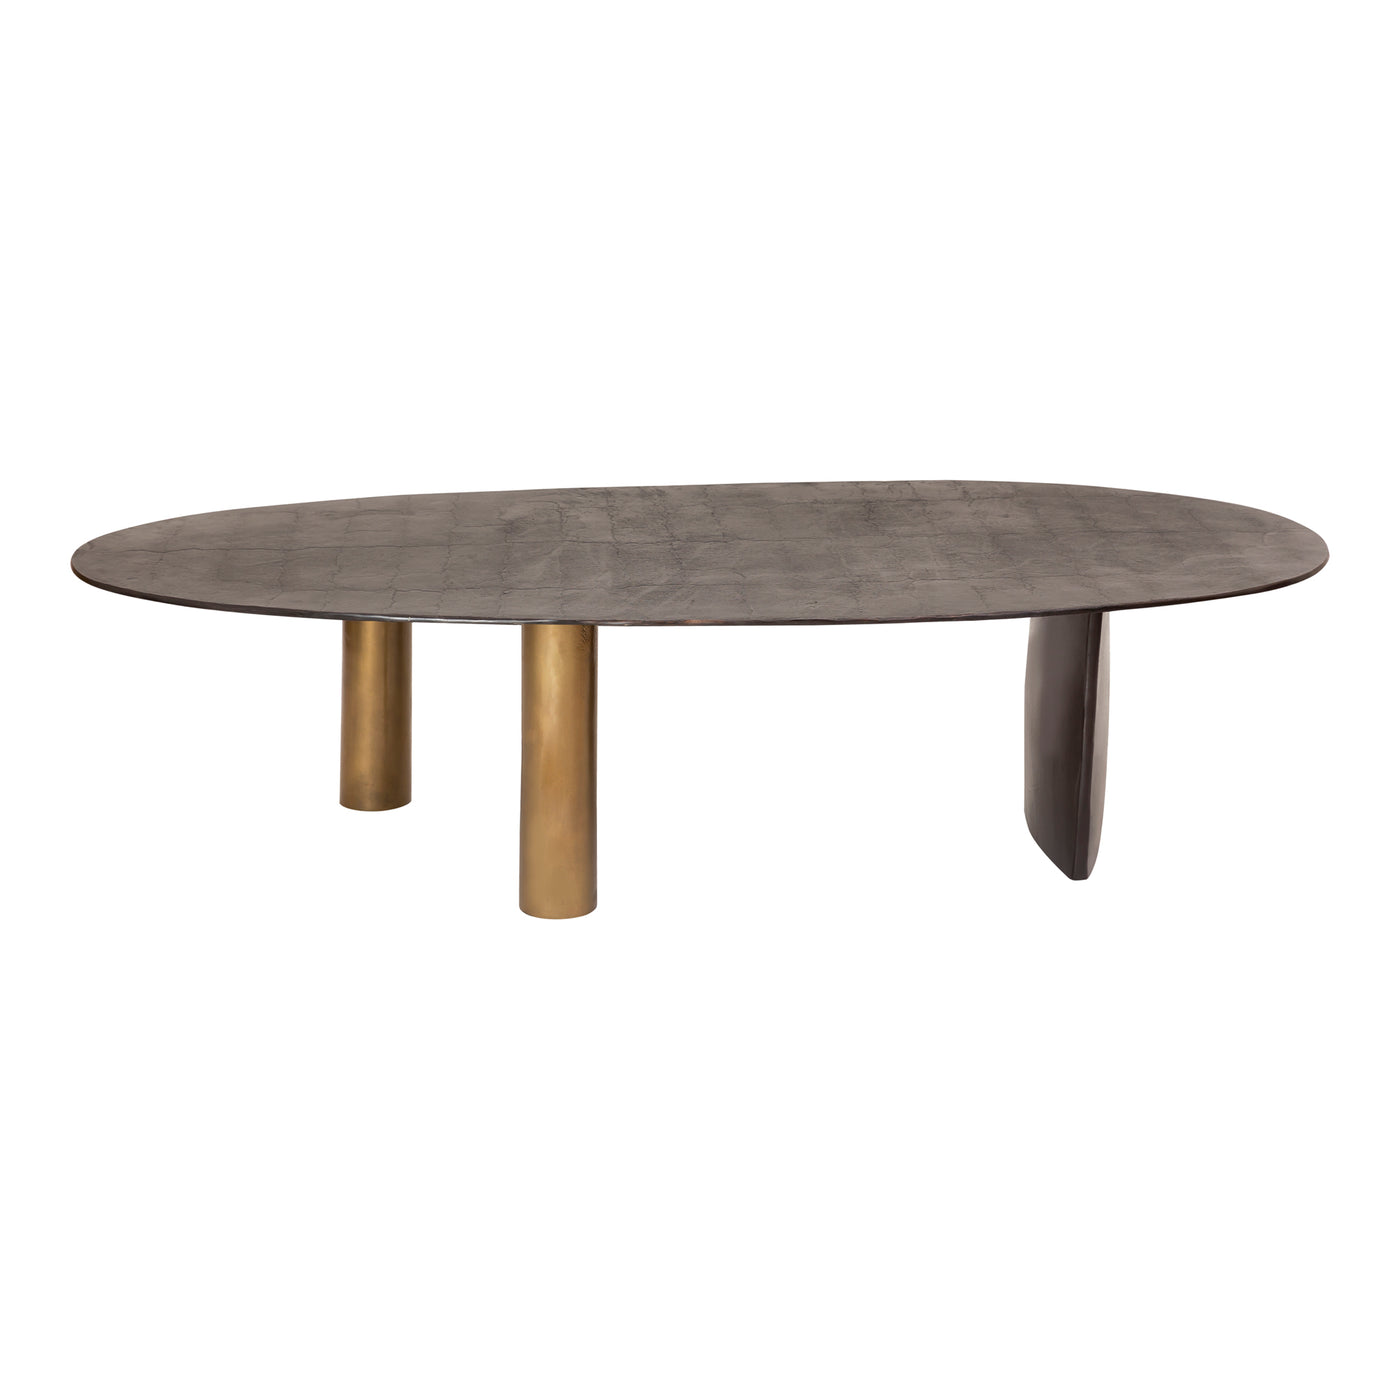 Blending industrial styling with a more organic shape, the Nicko coffee table is a unique add-on to the living room. The t...